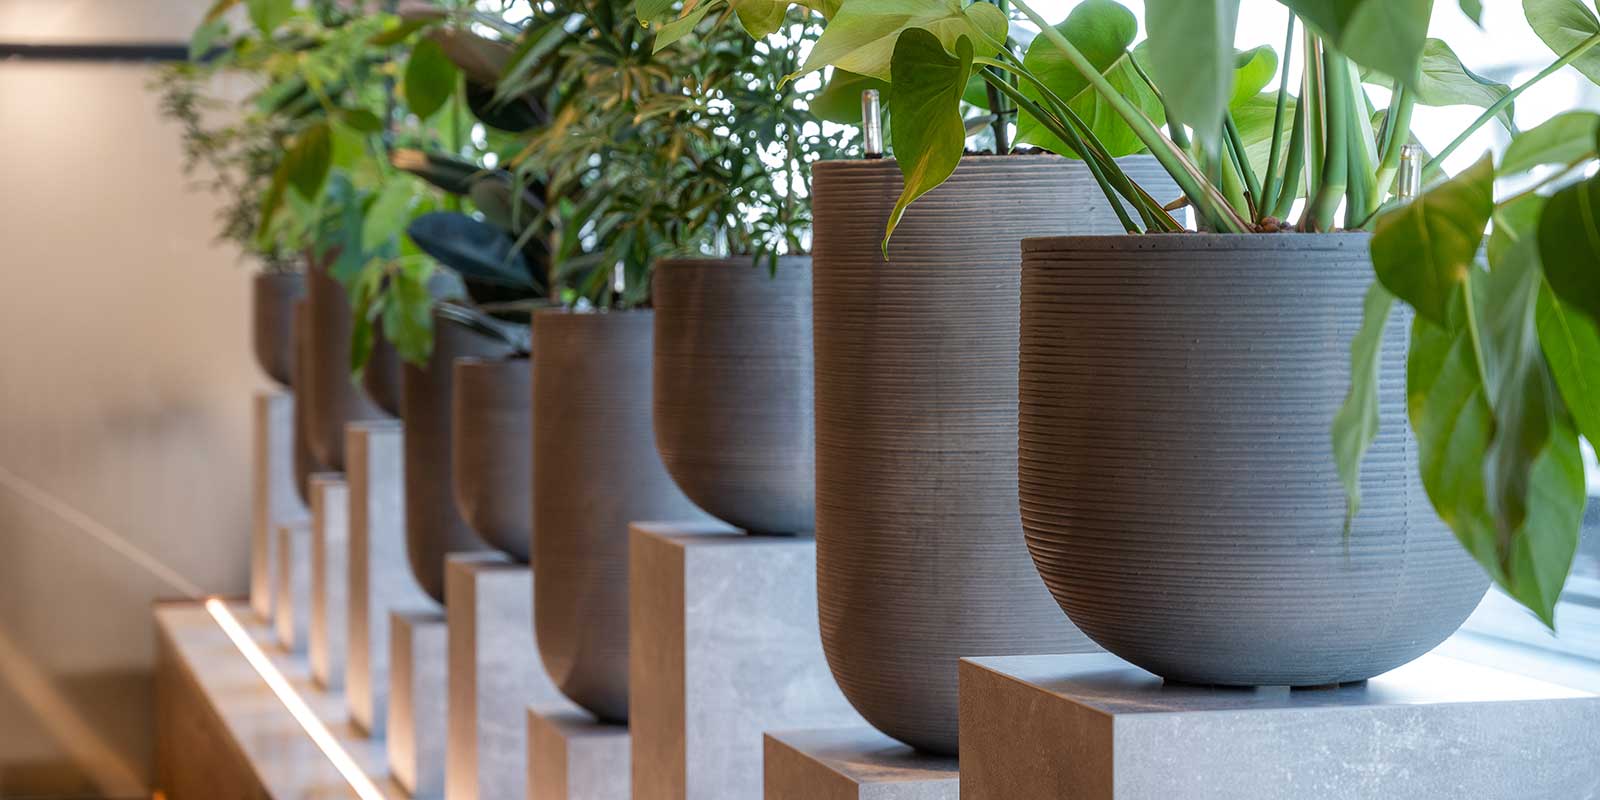 But Plants & Planters For Business - Plant Displays For Office, Retail & Hospitality